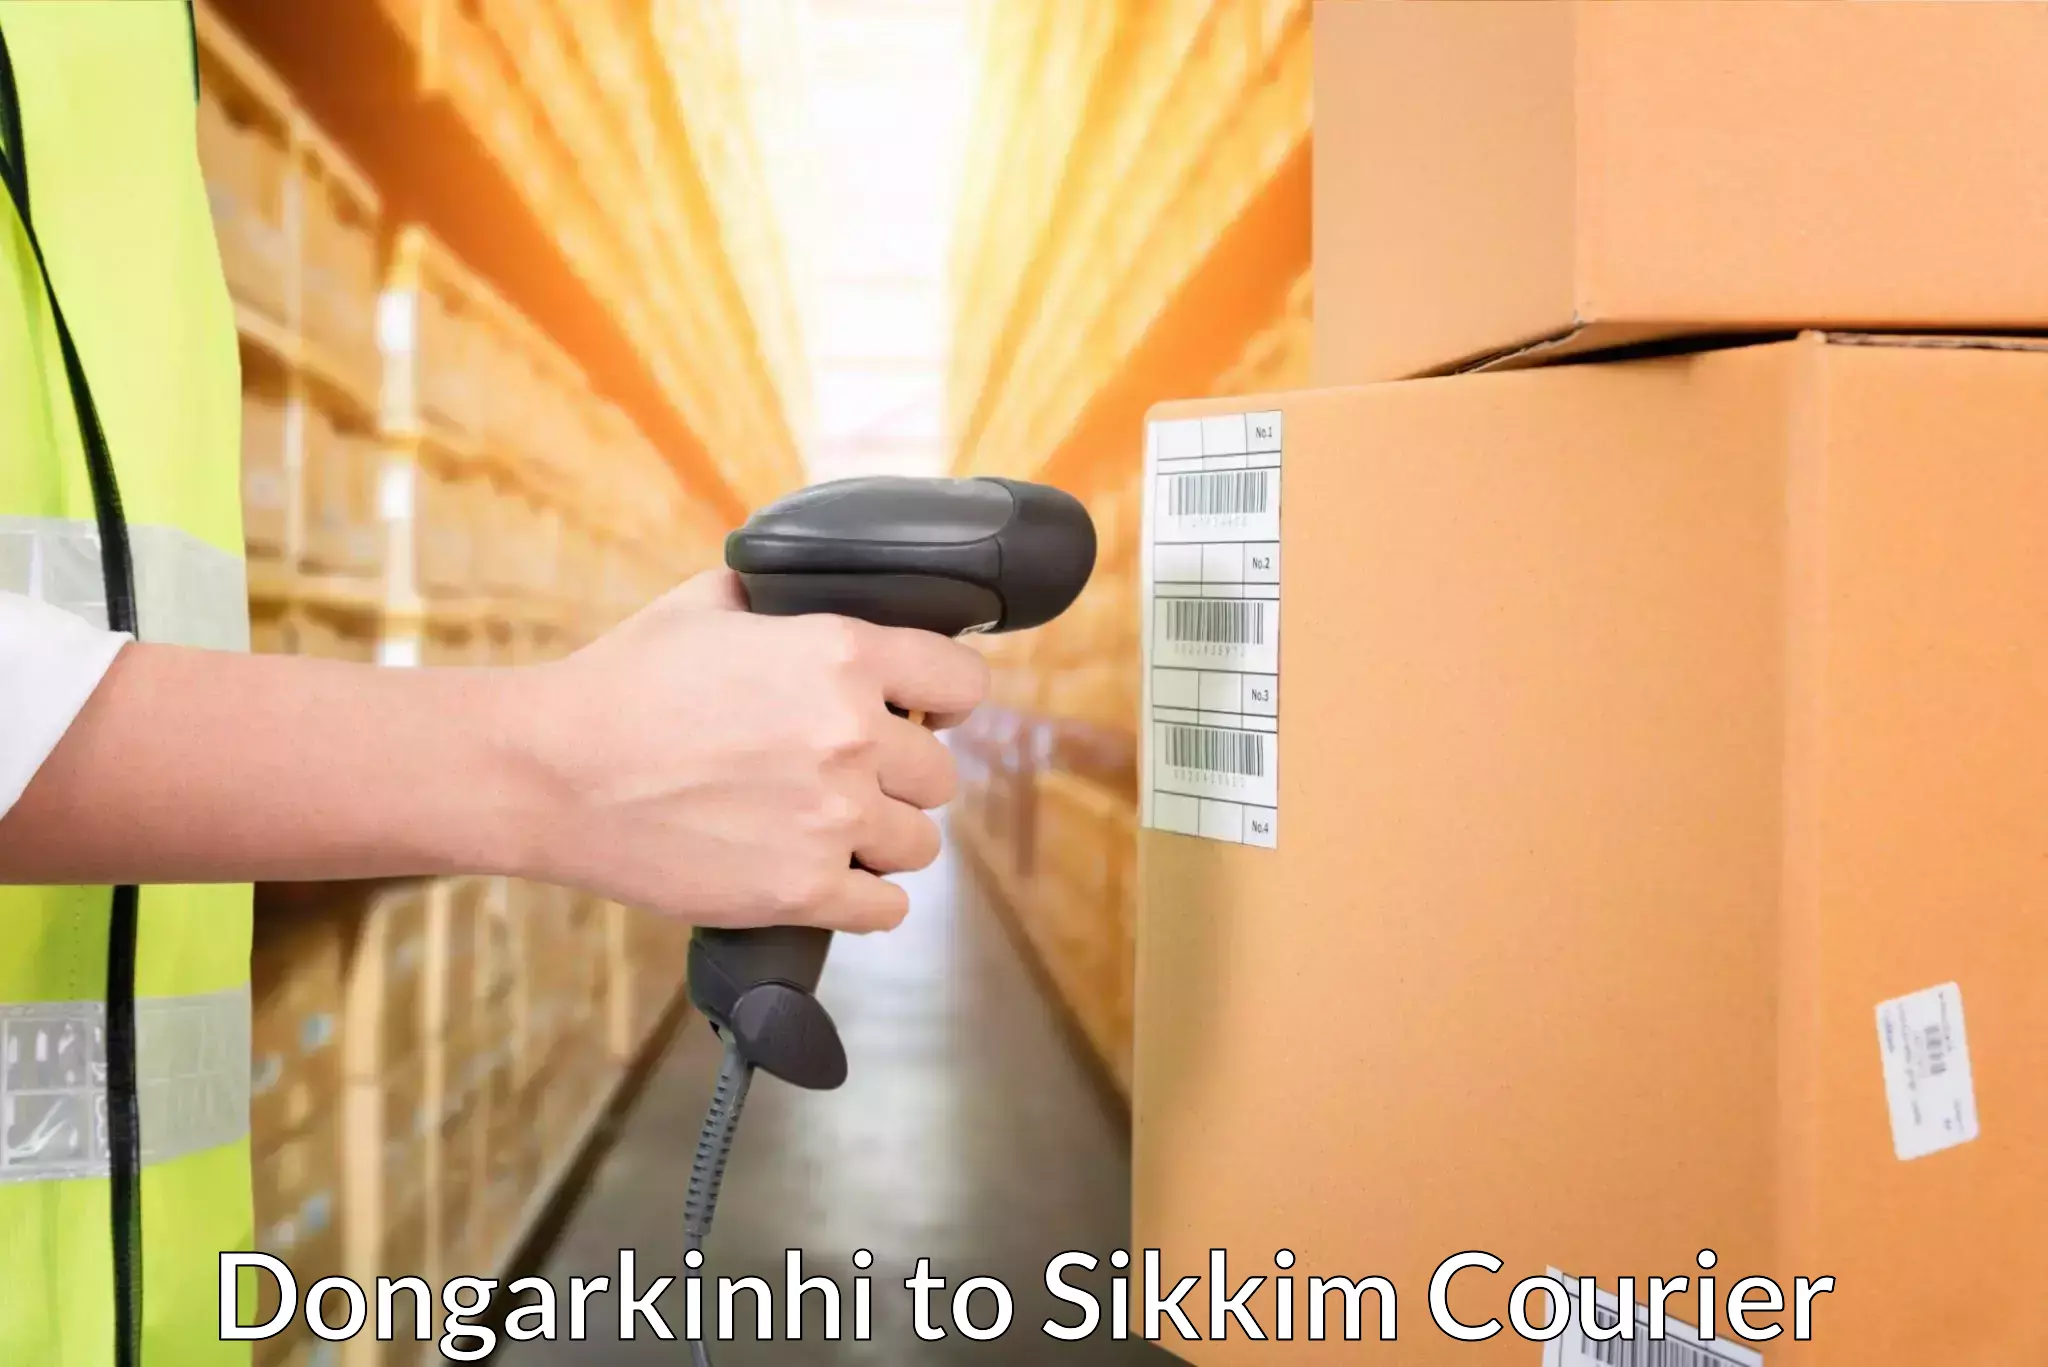 Express delivery solutions Dongarkinhi to South Sikkim